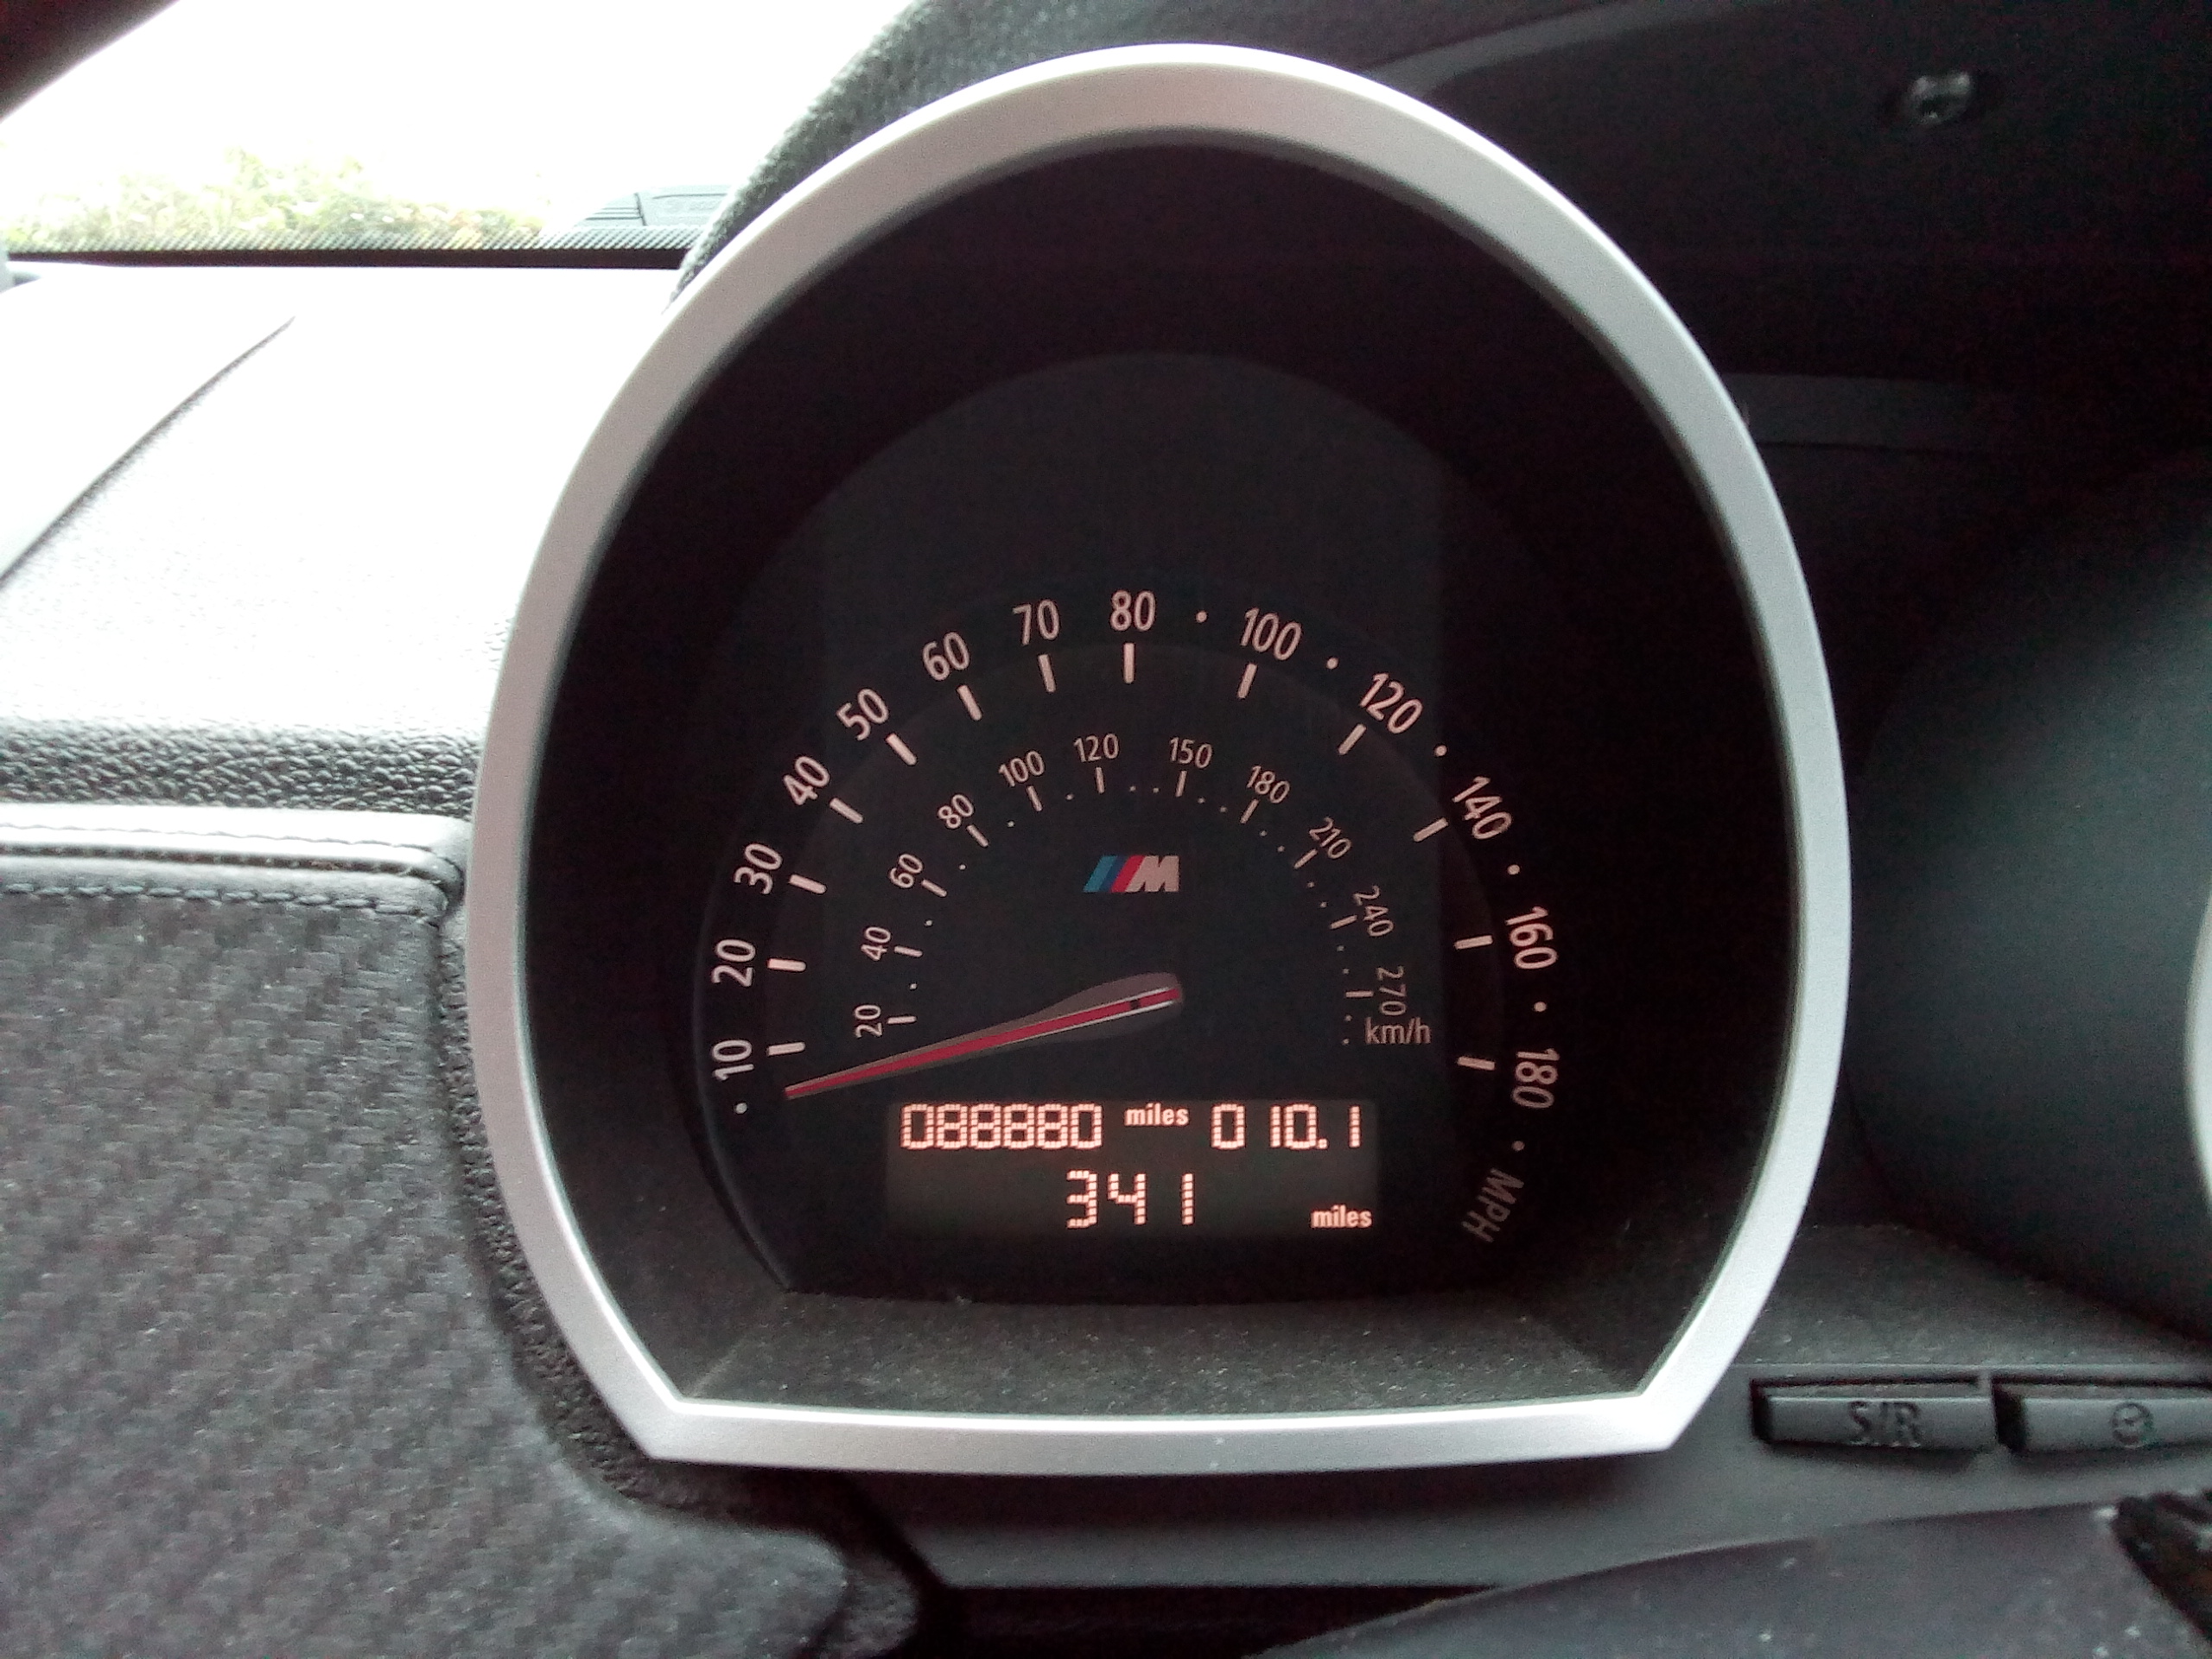 Pistonheads - The image shows a close-up of the instrument panel inside a car. The panel is dominated by a speedometer, which indicates a reading of 0 km/h. Above the speedometer, there's an odometer that displays "389", and below it, a gauge for fuel level. There are also indicators for distance to empty and battery charge. The car appears to be stationary, as evidenced by the needle on the speedometer pointing straight up. The background is out of focus, drawing attention to the dashboard.